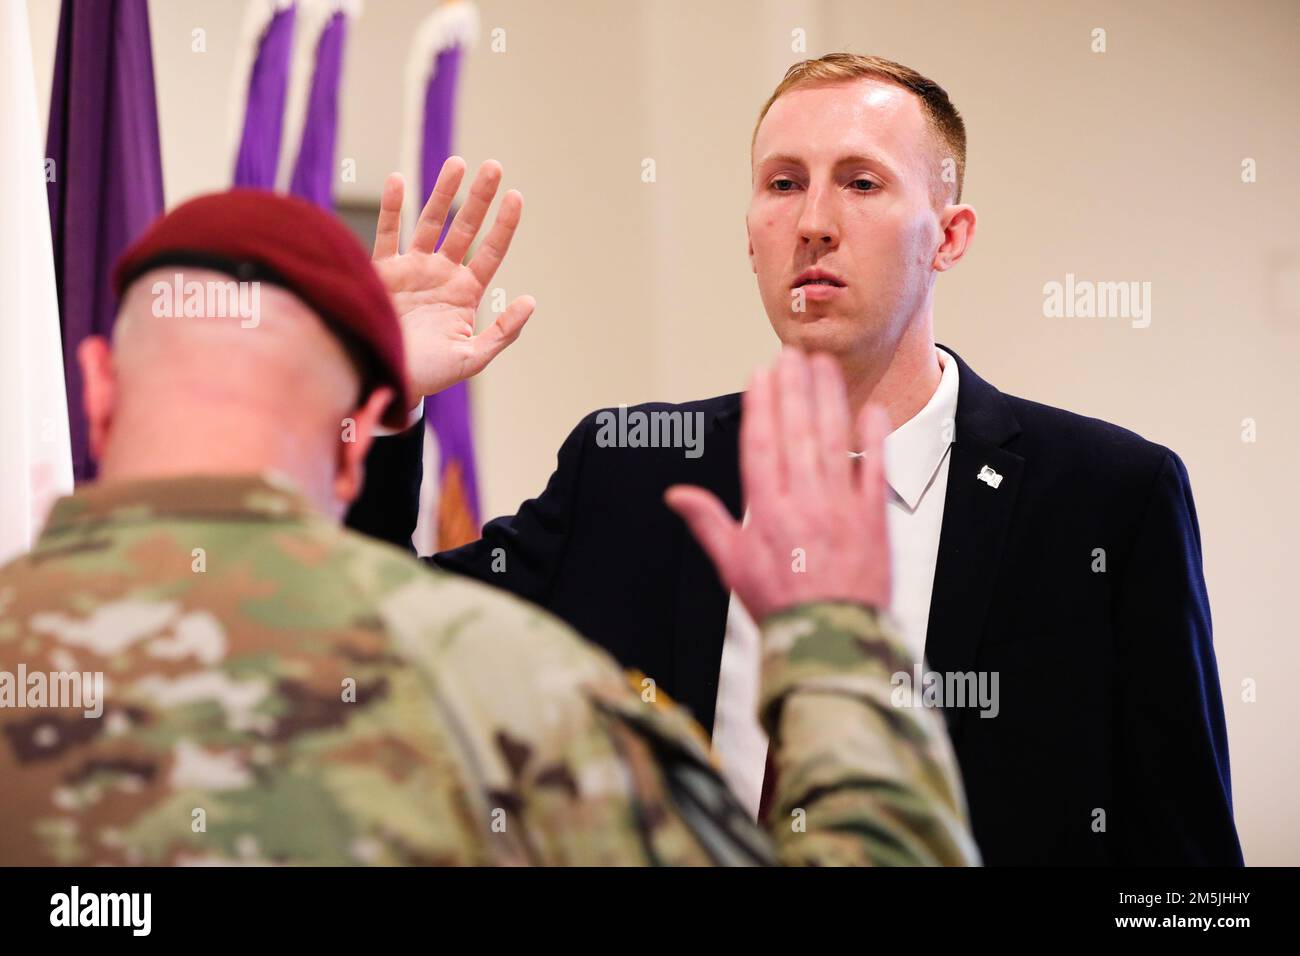 Maj. Gen. Jeffrey Coggin, left, commanding general of the U.S. Army Civil Affairs and Psychological Operations Command, administers an oath to U.S. Army Reserve Capt. Ryan Hooper, right, a 7th grade teacher in Philadelphia, making him the first Soldier to be directly commissioned as a civil affairs military government specialist at Fort Hamilton, N.Y., March 19, 2022. The new civil affairs military government specialist position will enable civilian and military personnel with experience in various career fields to be commissioned as officers in the U.S. Army. Stock Photo